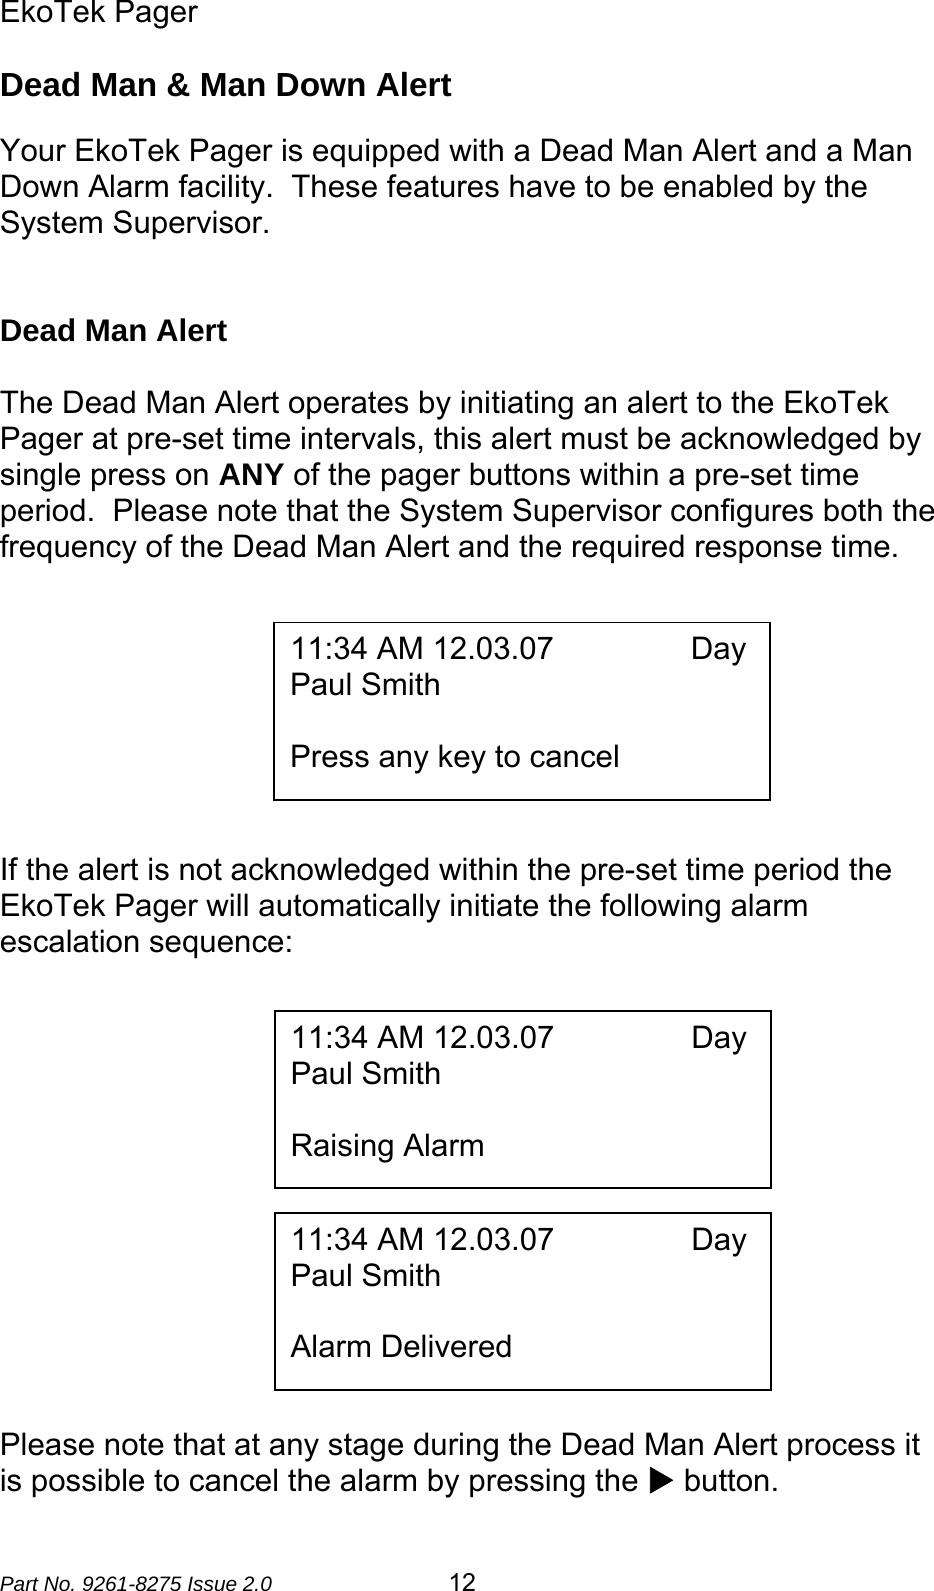 EkoTek Pager  Part No. 9261-8275 Issue 2.0   12 Dead Man &amp; Man Down Alert  Your EkoTek Pager is equipped with a Dead Man Alert and a Man Down Alarm facility.  These features have to be enabled by the System Supervisor.   Dead Man Alert  The Dead Man Alert operates by initiating an alert to the EkoTek Pager at pre-set time intervals, this alert must be acknowledged by single press on ANY of the pager buttons within a pre-set time period.  Please note that the System Supervisor configures both the frequency of the Dead Man Alert and the required response time.           If the alert is not acknowledged within the pre-set time period the EkoTek Pager will automatically initiate the following alarm escalation sequence:               Please note that at any stage during the Dead Man Alert process it is possible to cancel the alarm by pressing the X button. 11:34 AM 12.03.07                Day Paul Smith  Press any key to cancel 11:34 AM 12.03.07                Day Paul Smith  Raising Alarm 11:34 AM 12.03.07                Day Paul Smith  Alarm Delivered 